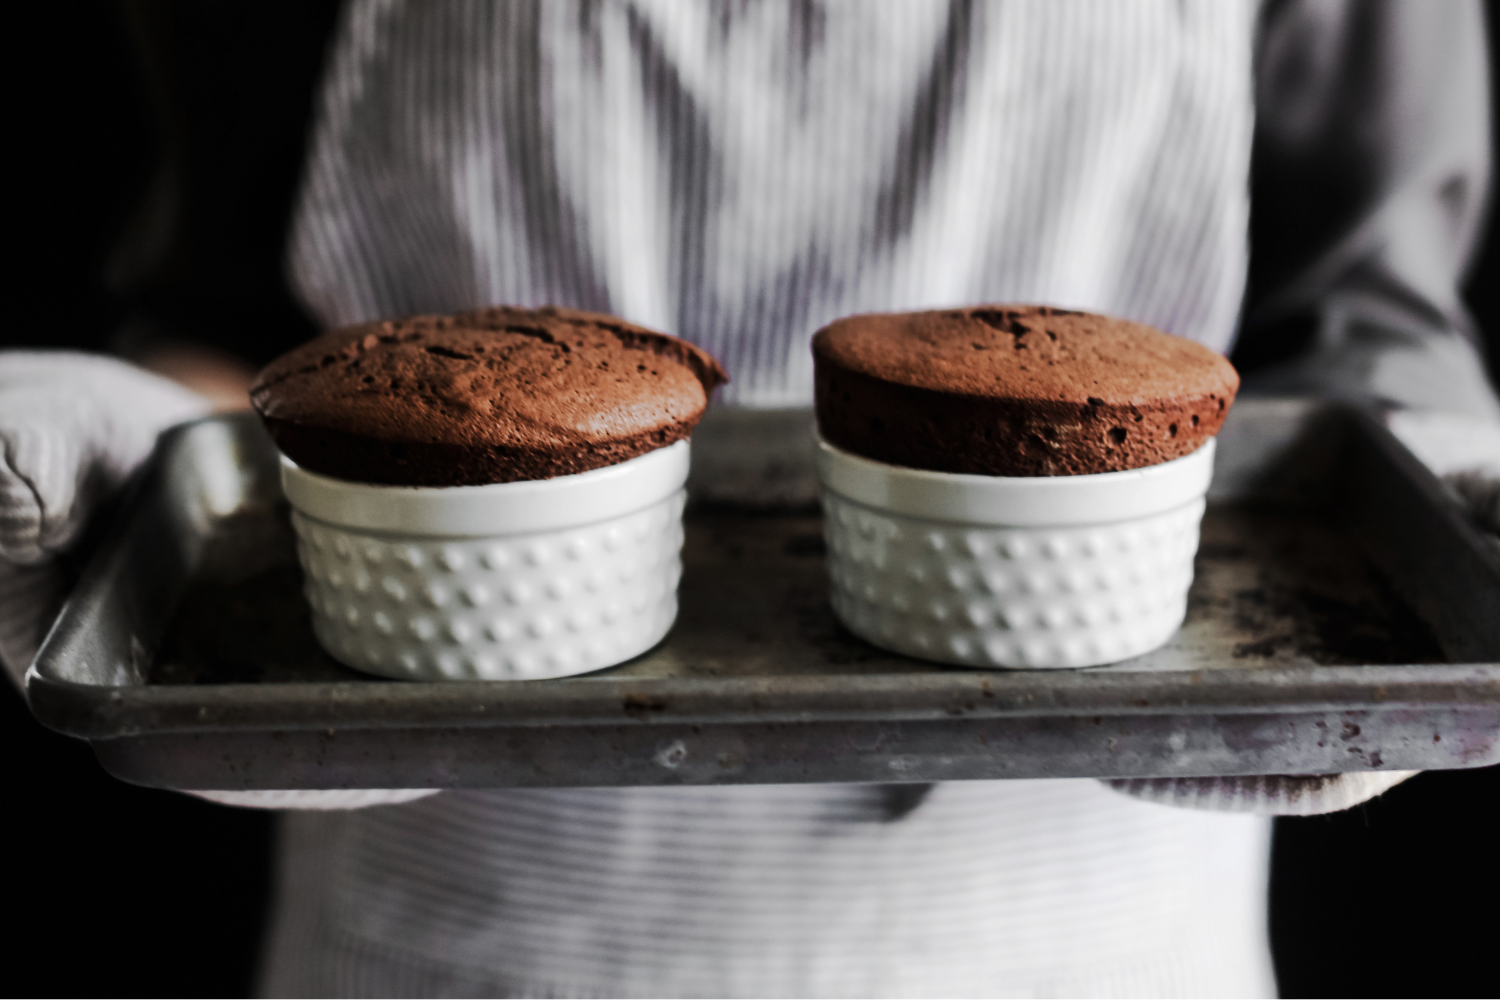 two Chocolate Soufflés in white ramekins on a baking tray, fresh out of the oven.